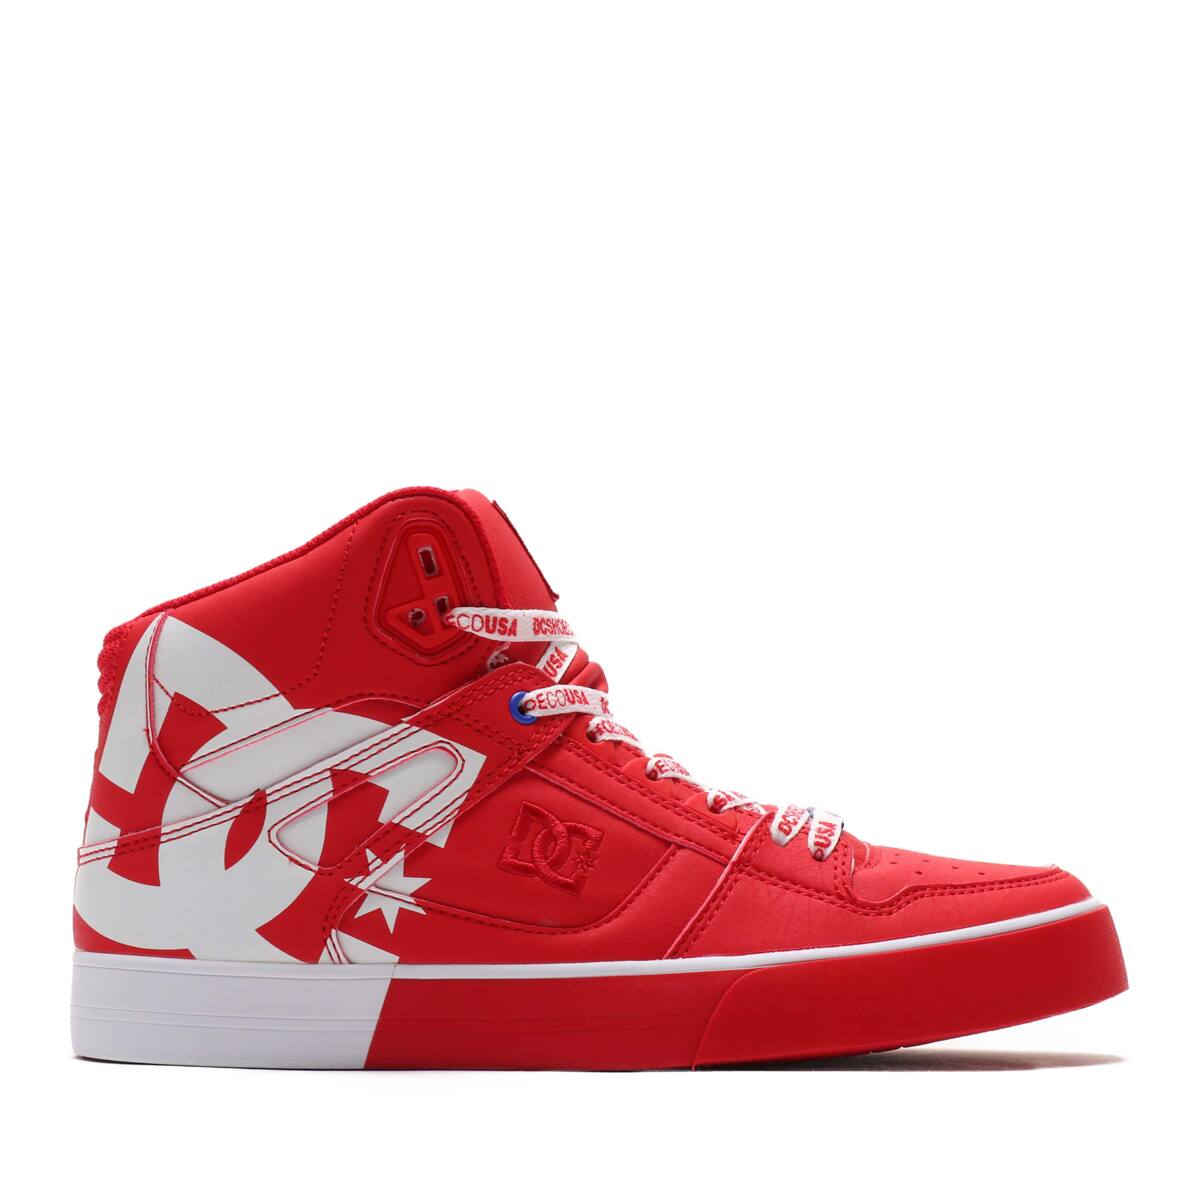 red dc shoes high tops, OFF 73%,Buy!